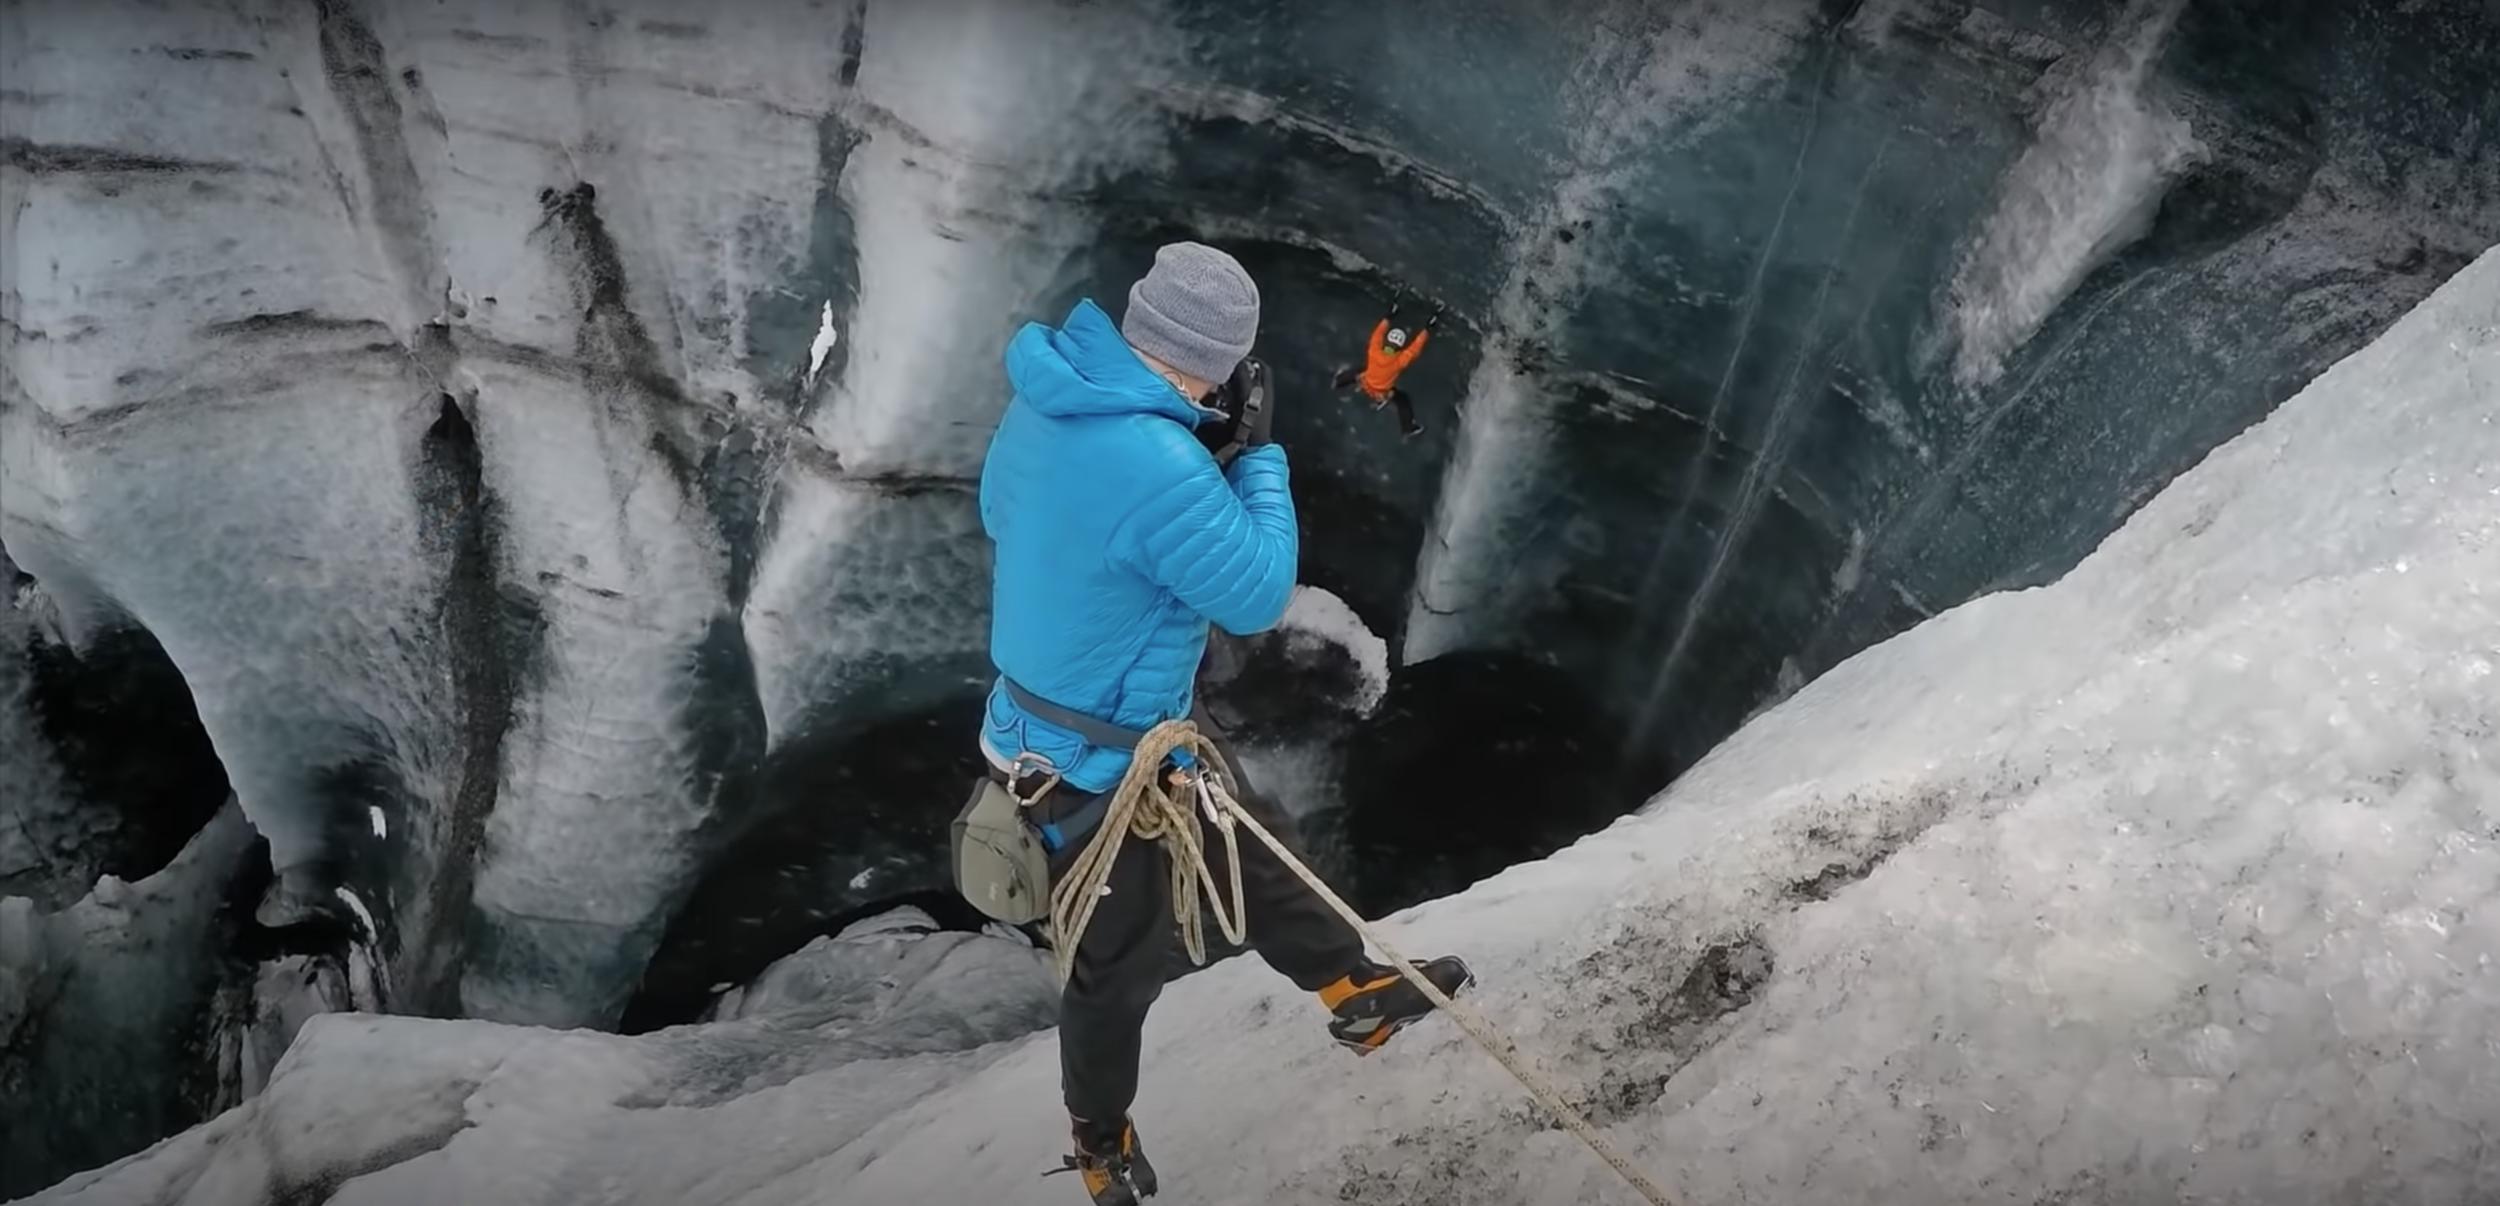 Conquering Fears in the Icelandic Wild